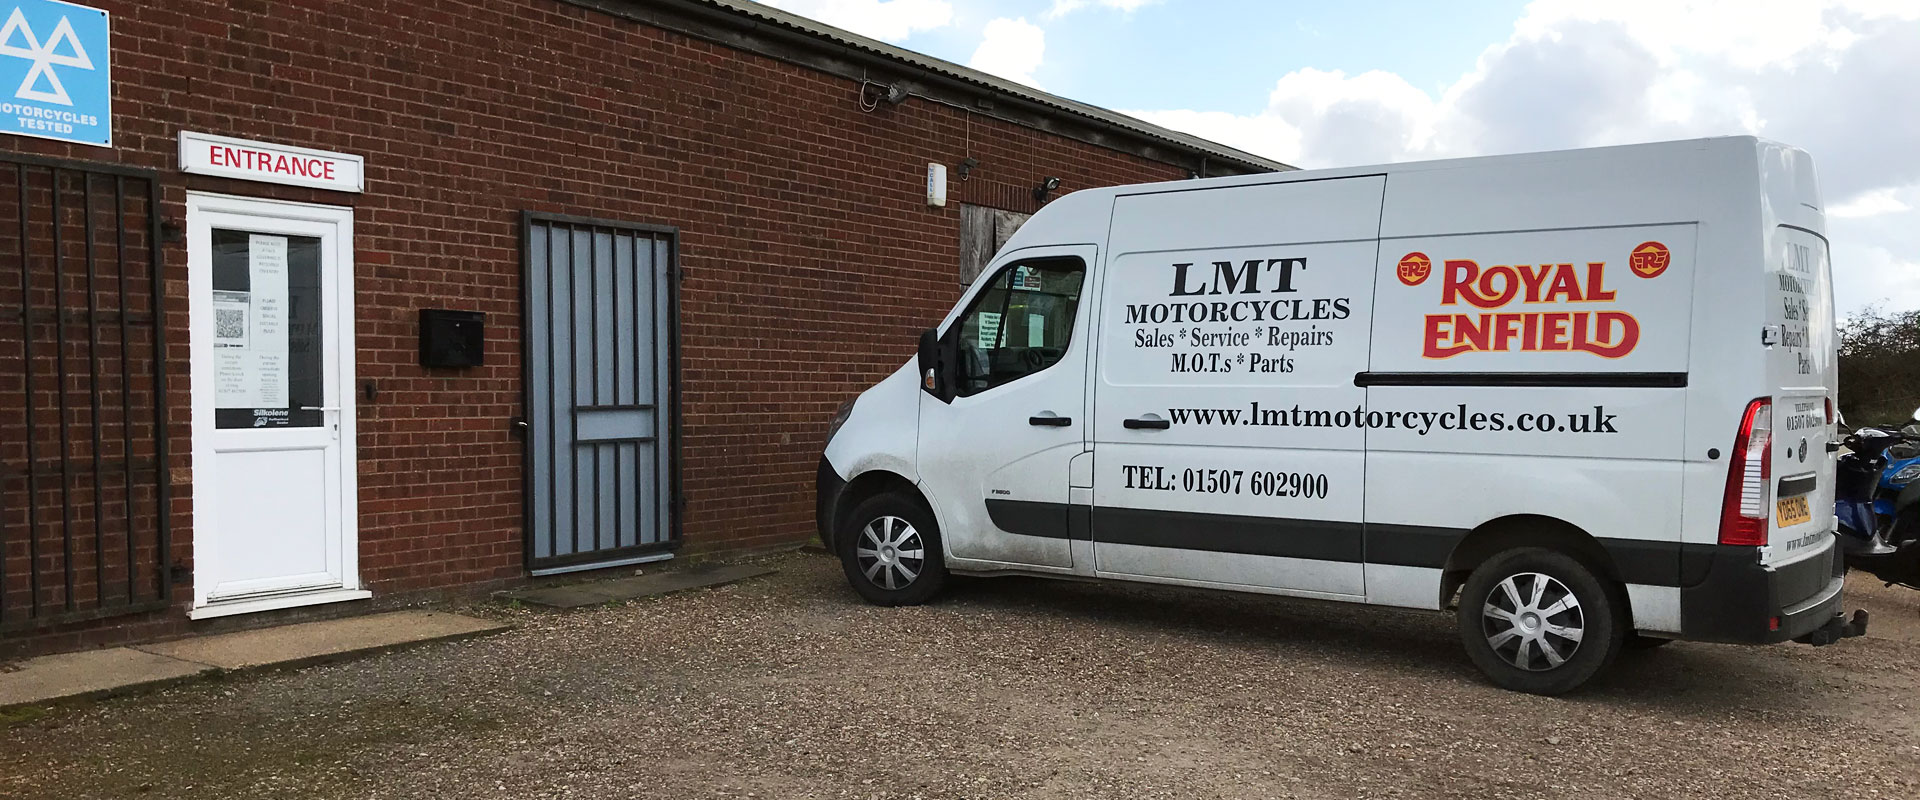 Outside our shop - LMT Motorcycles, Louth Lincolnshire